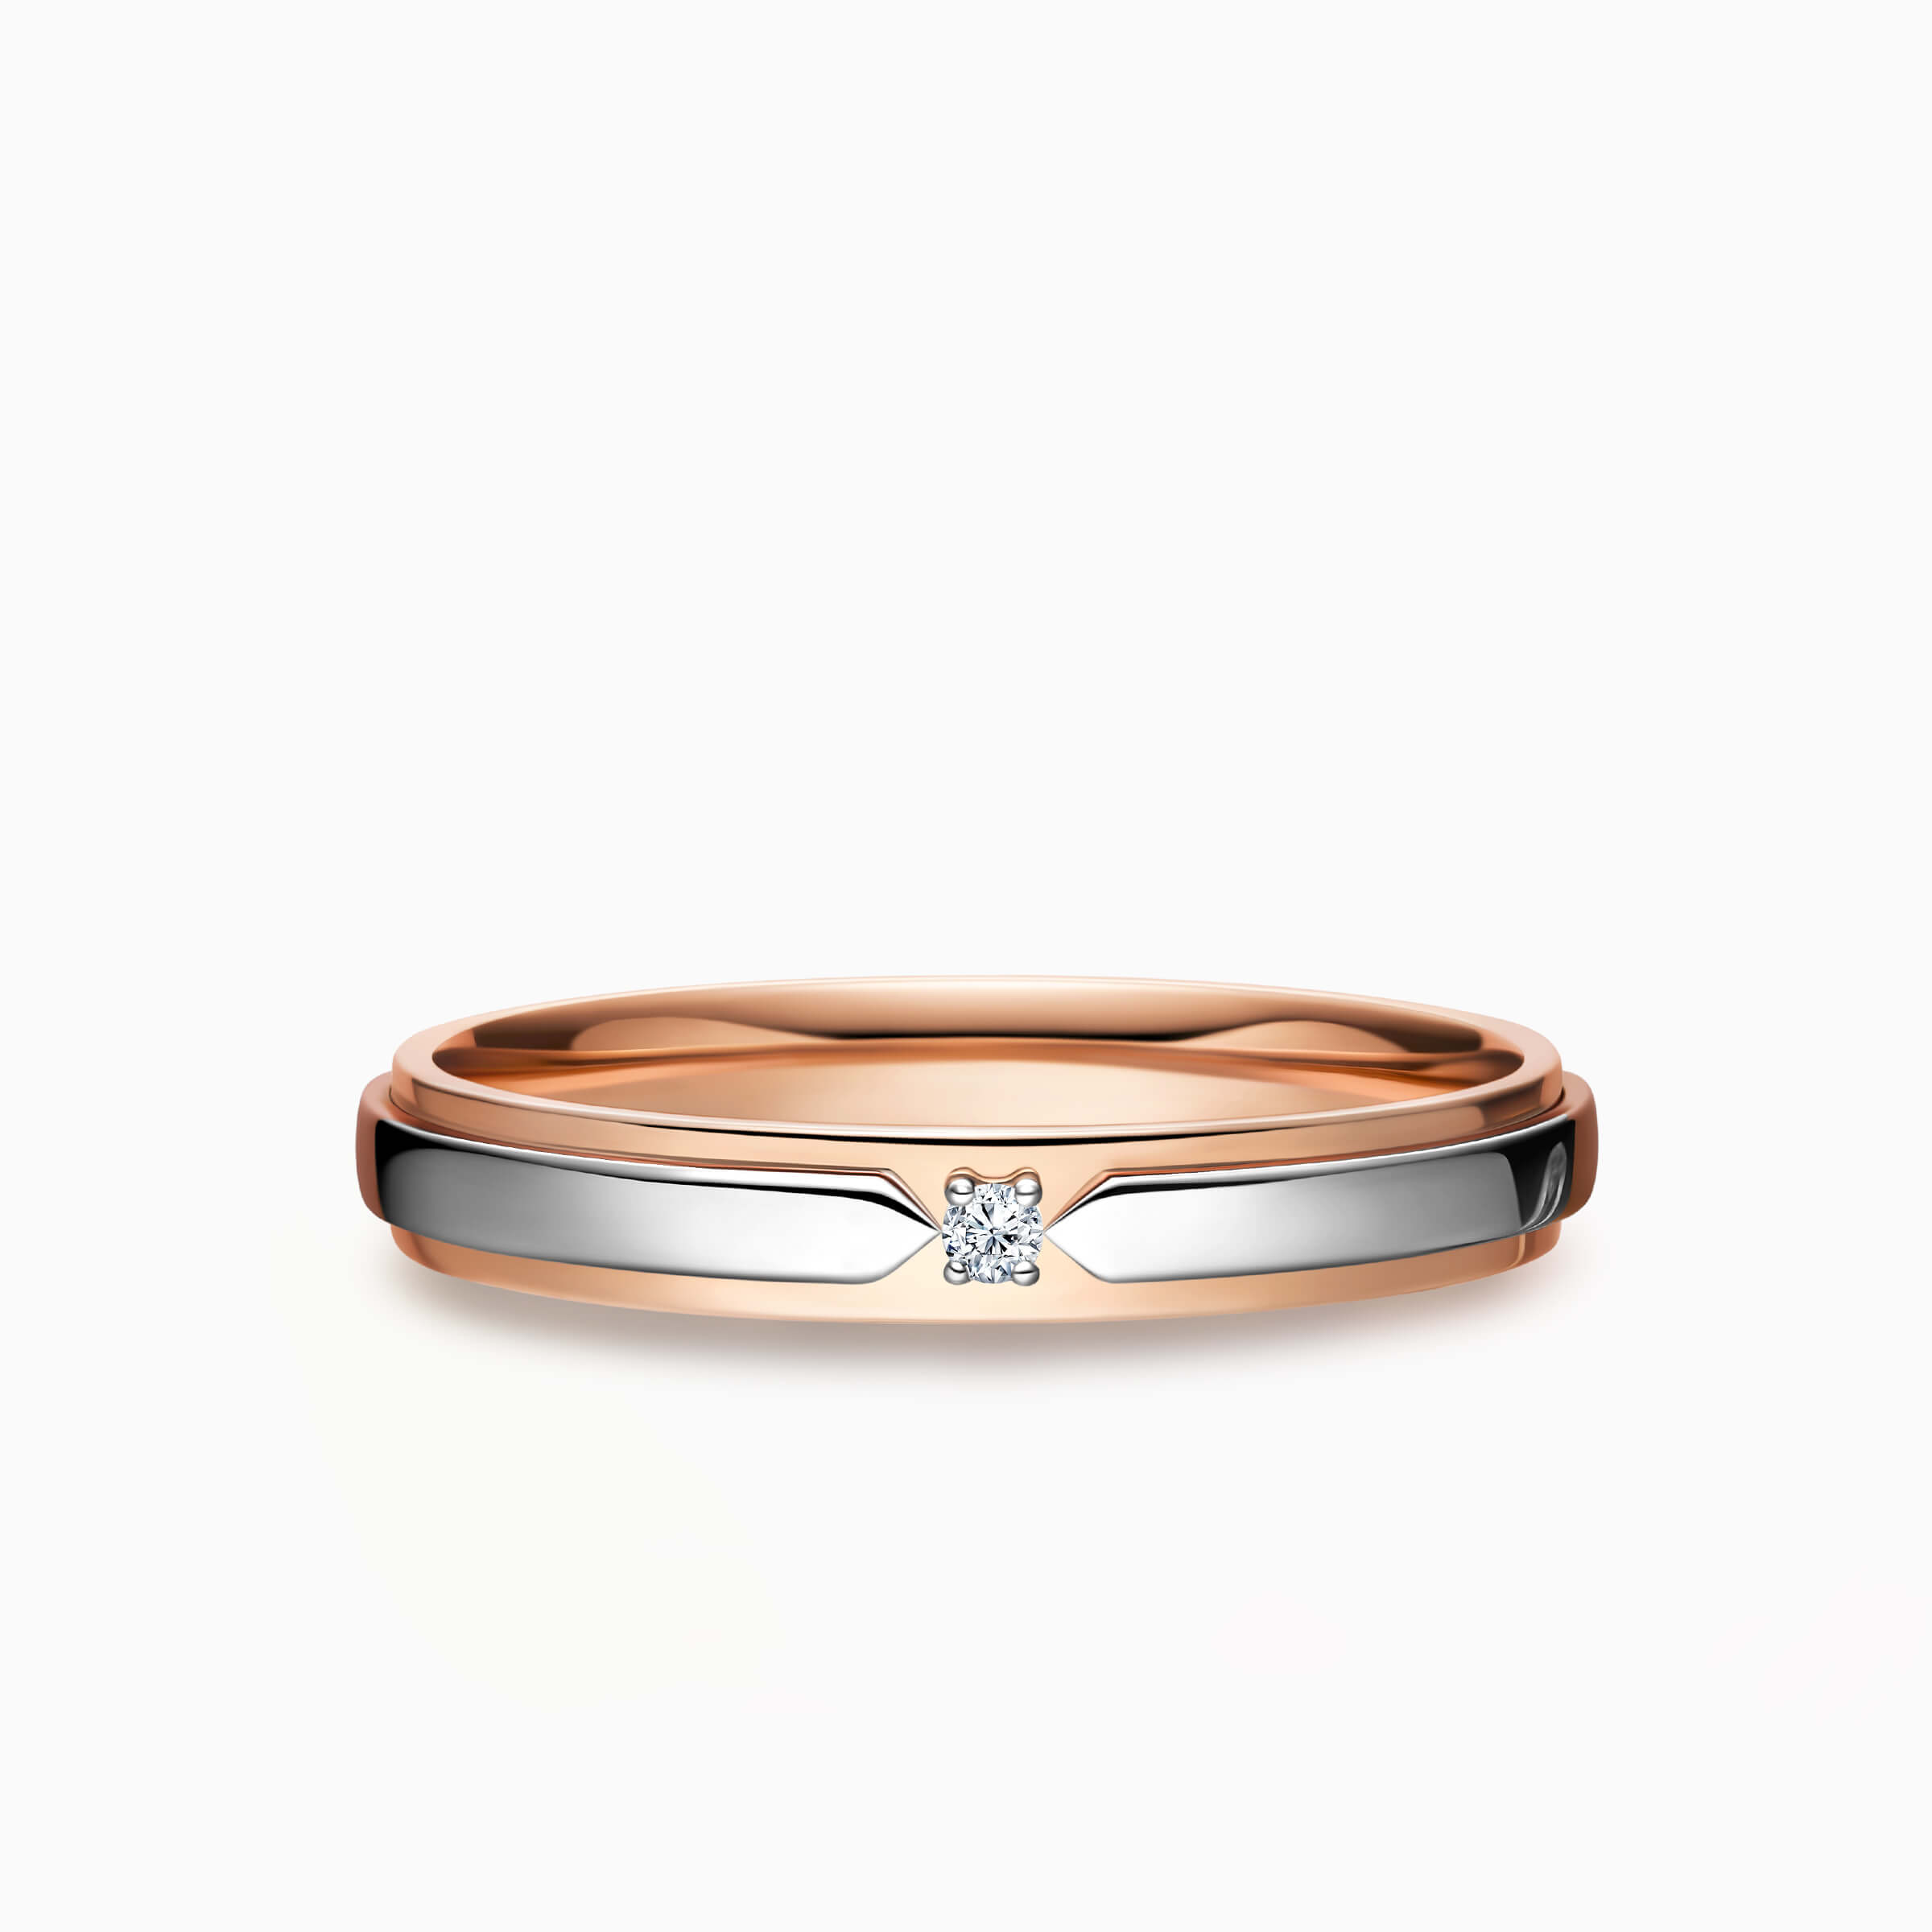 Darry Ring two toned wedding ring for him